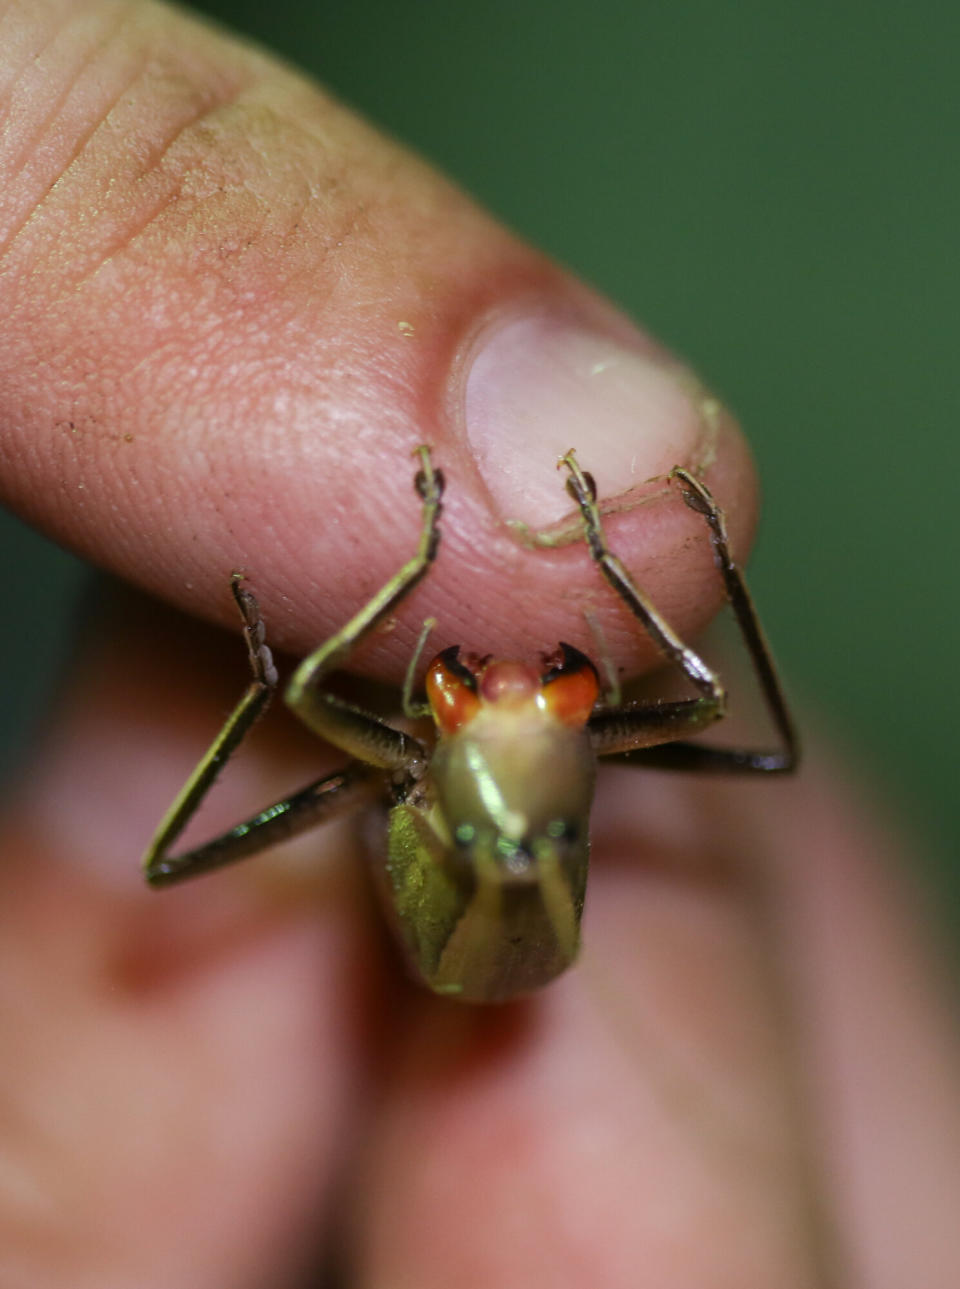 In this Monday, Sept. 24, 2012 photo, a Coneheaded katydid bites on the finger of Zack Lemann, animal and visitor programs manager of the Audubon Butterfly Garden Insectarium, as he and other employees collect bugs for their exhibits in Des Allemands, La. Some of the bugs are raised to exhibit later at the insectarium, while others are shipped to museums. Much of an insectarium’s stock dies in a year or less, so the replenishment missions for local species are essential. (AP Photo/Kerry Maloney)